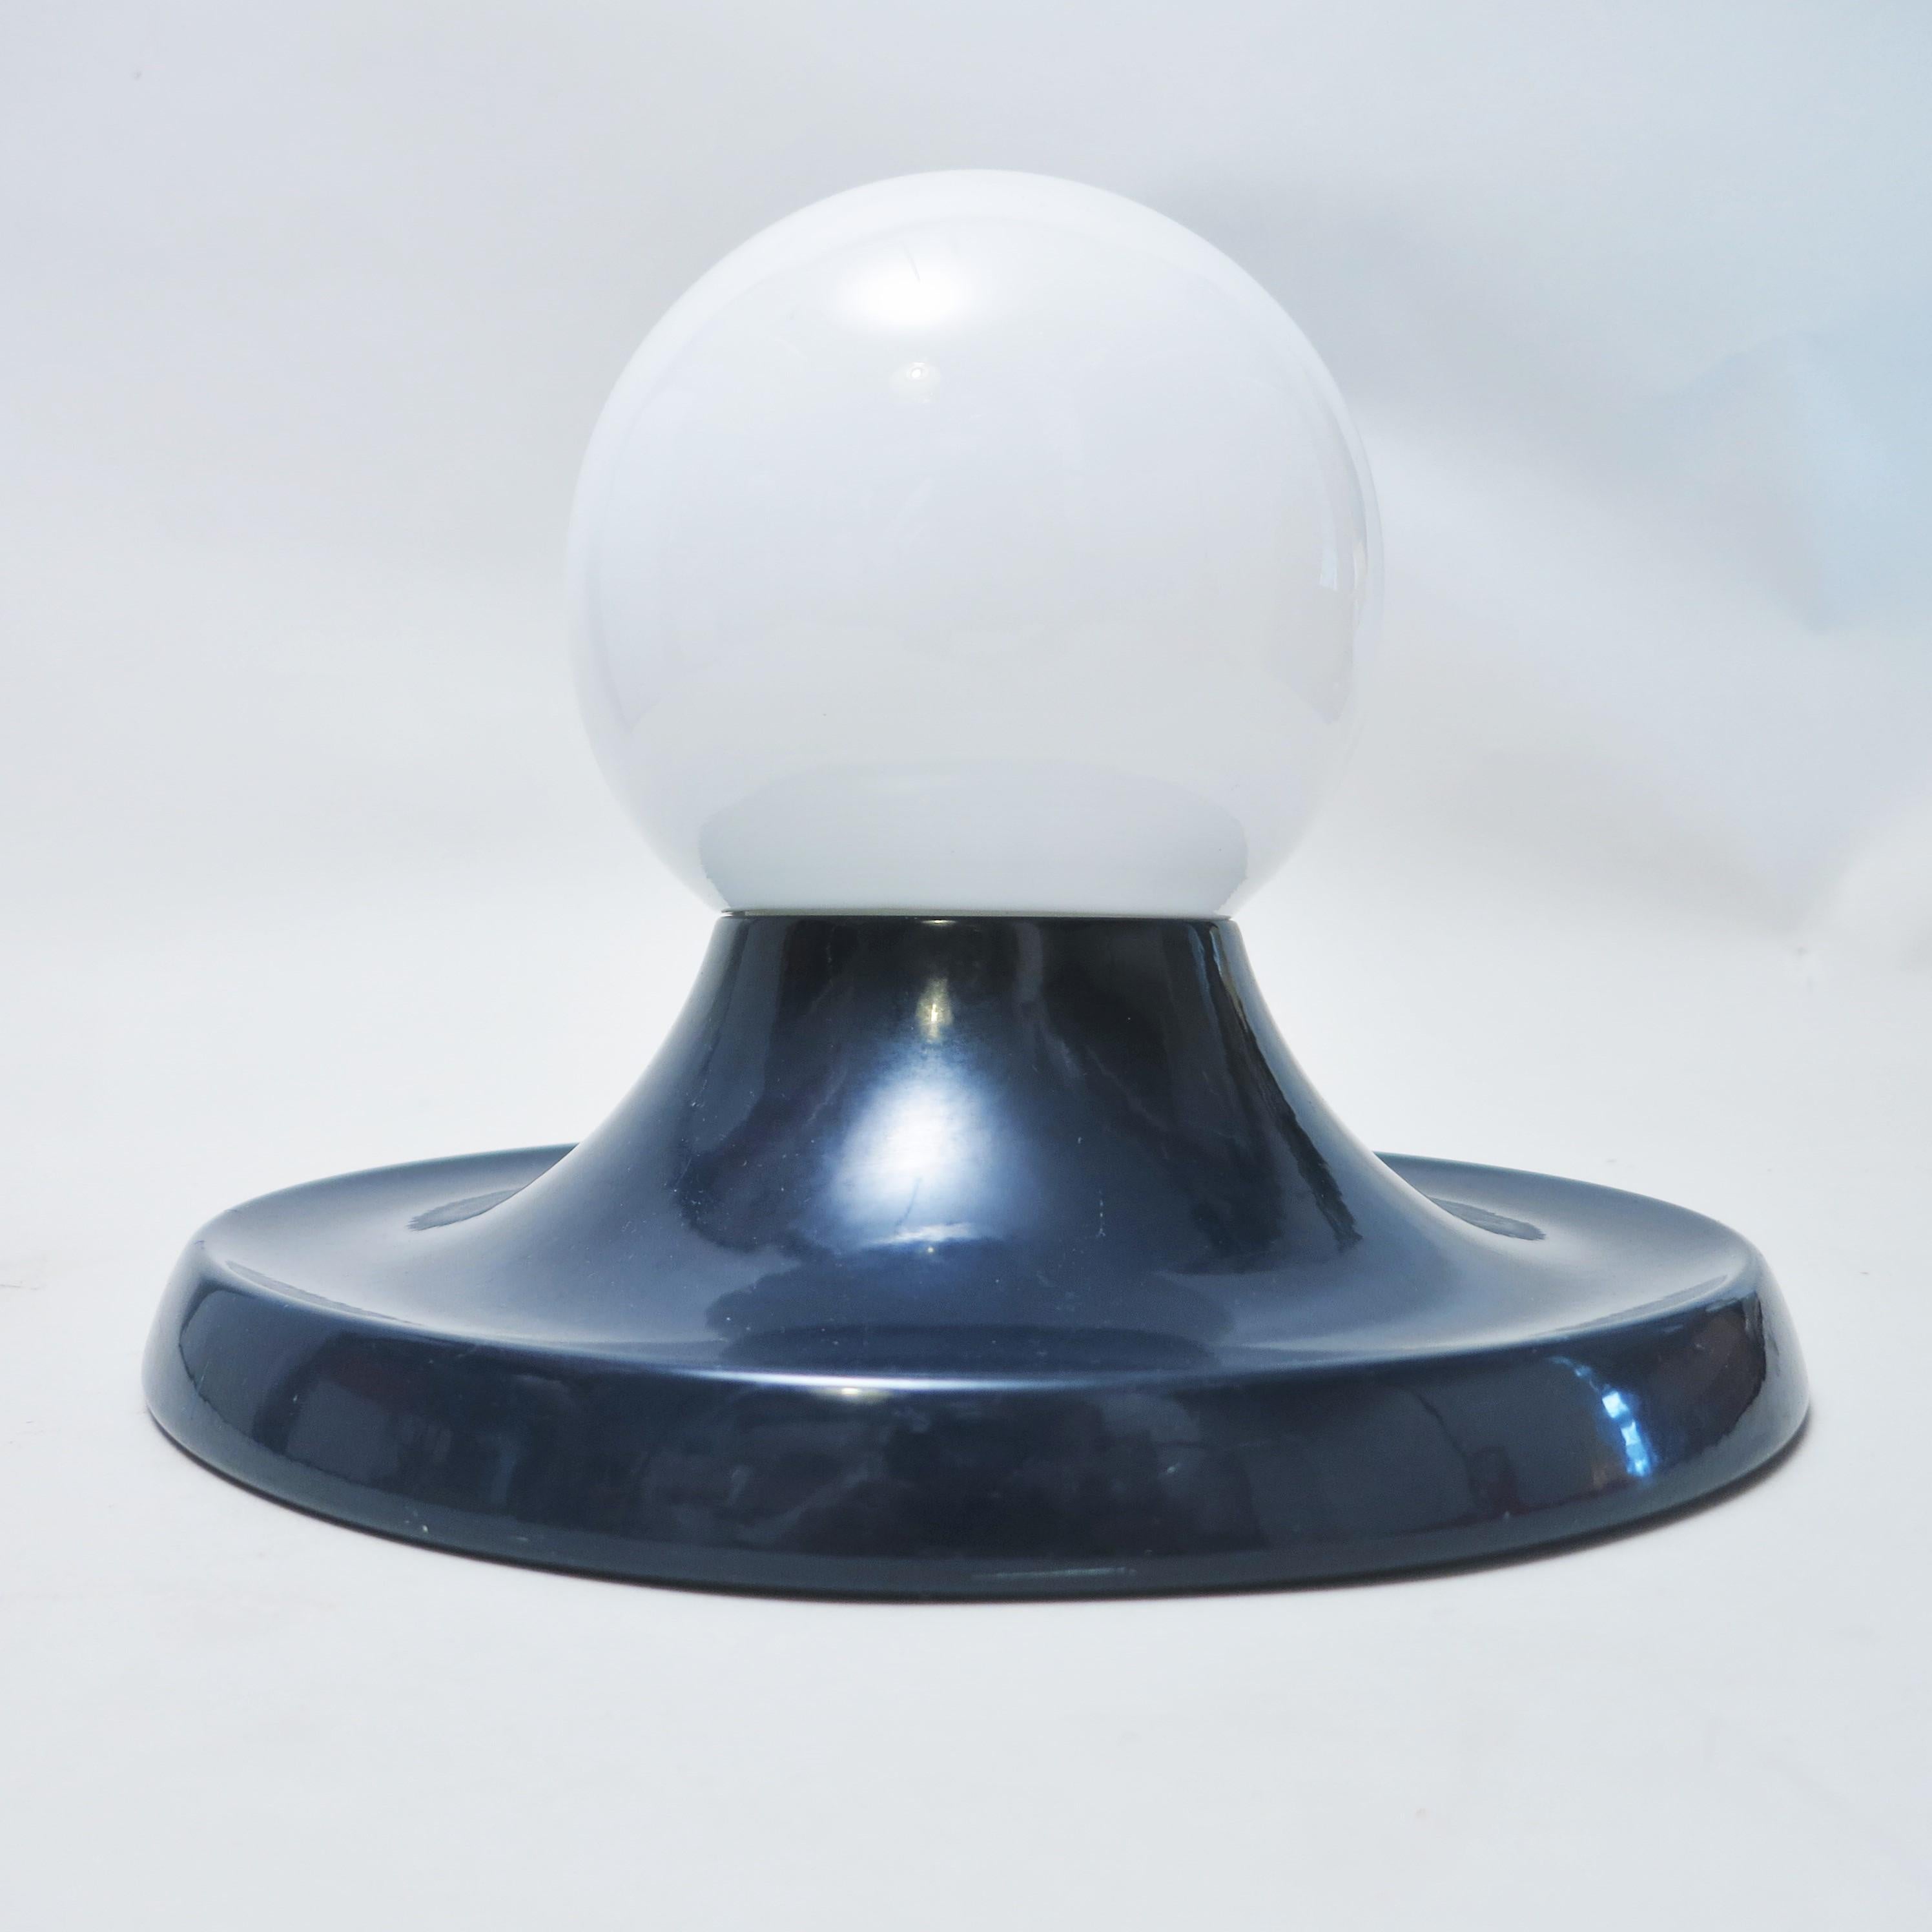 Light ball ceiling lamp or wall lamp designed by Achille & Pier Giacomo Castiglioni for Flos (out of production)
in dark blue lacquered metal and white opaline glass.